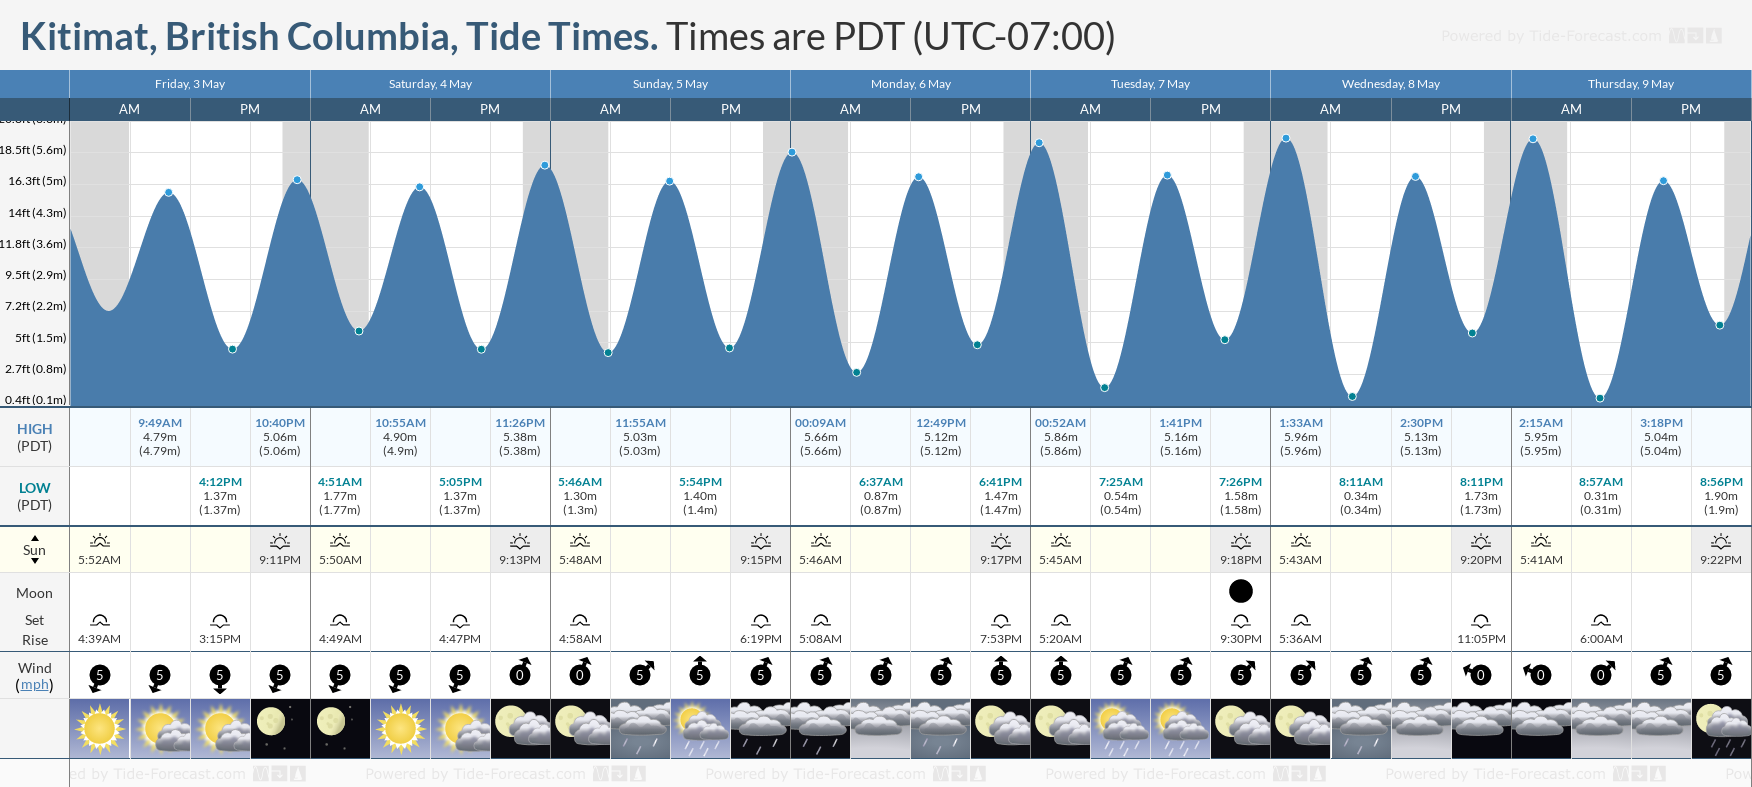 Kitimat, British Columbia Tide Chart including high and low tide tide times for the next 7 days